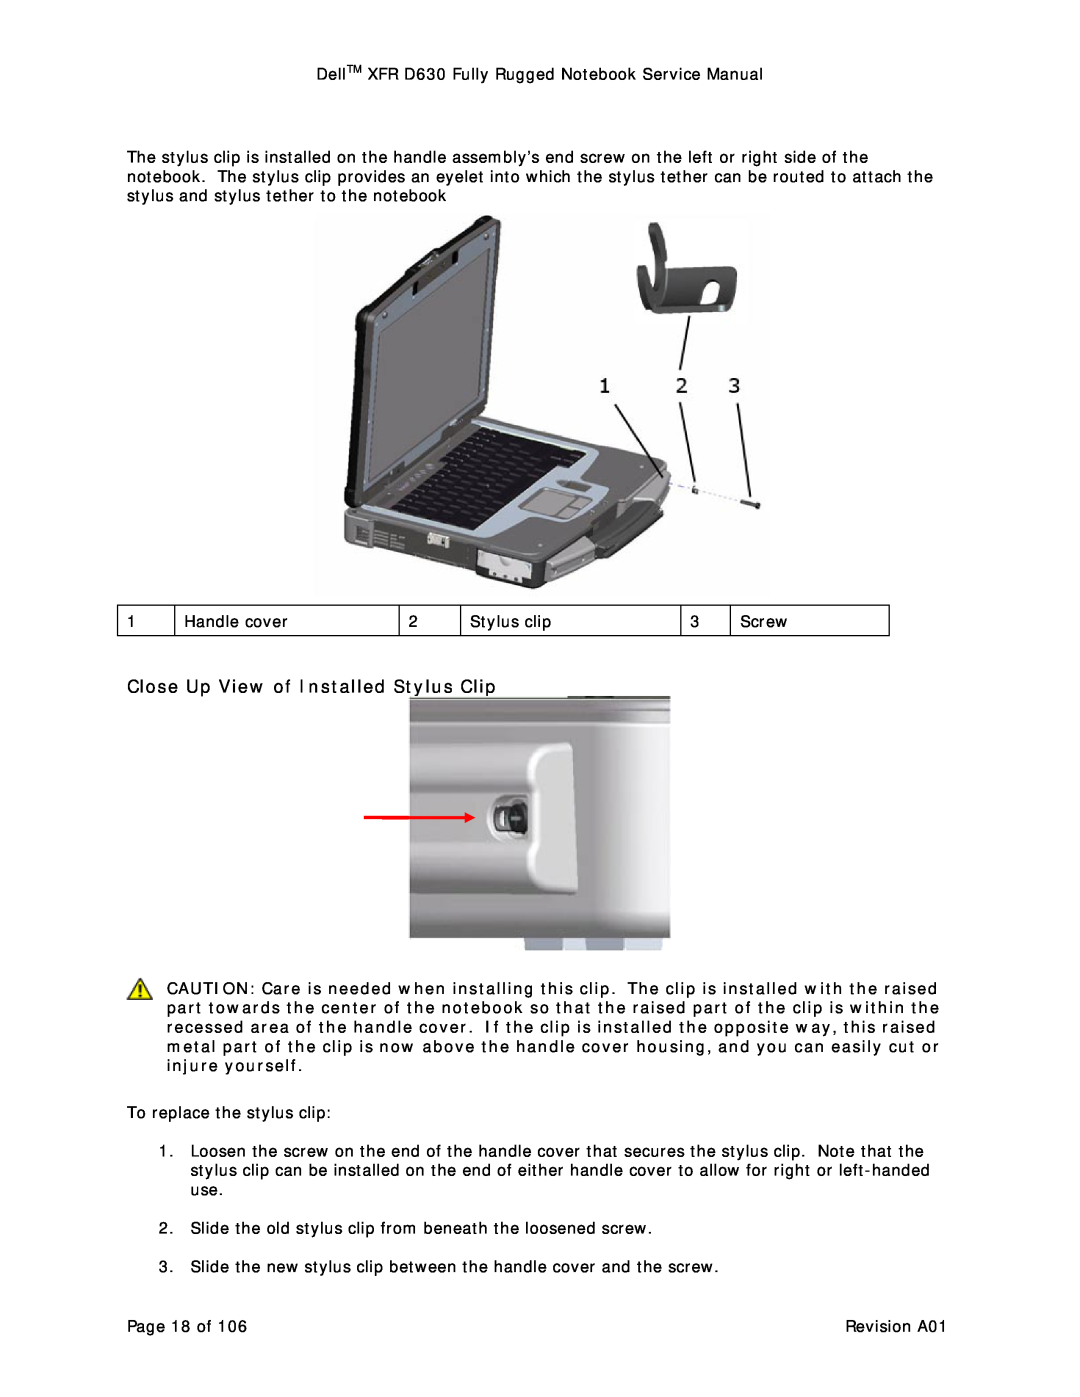 Dell D630 service manual Close Up View of Installed Stylus Clip 